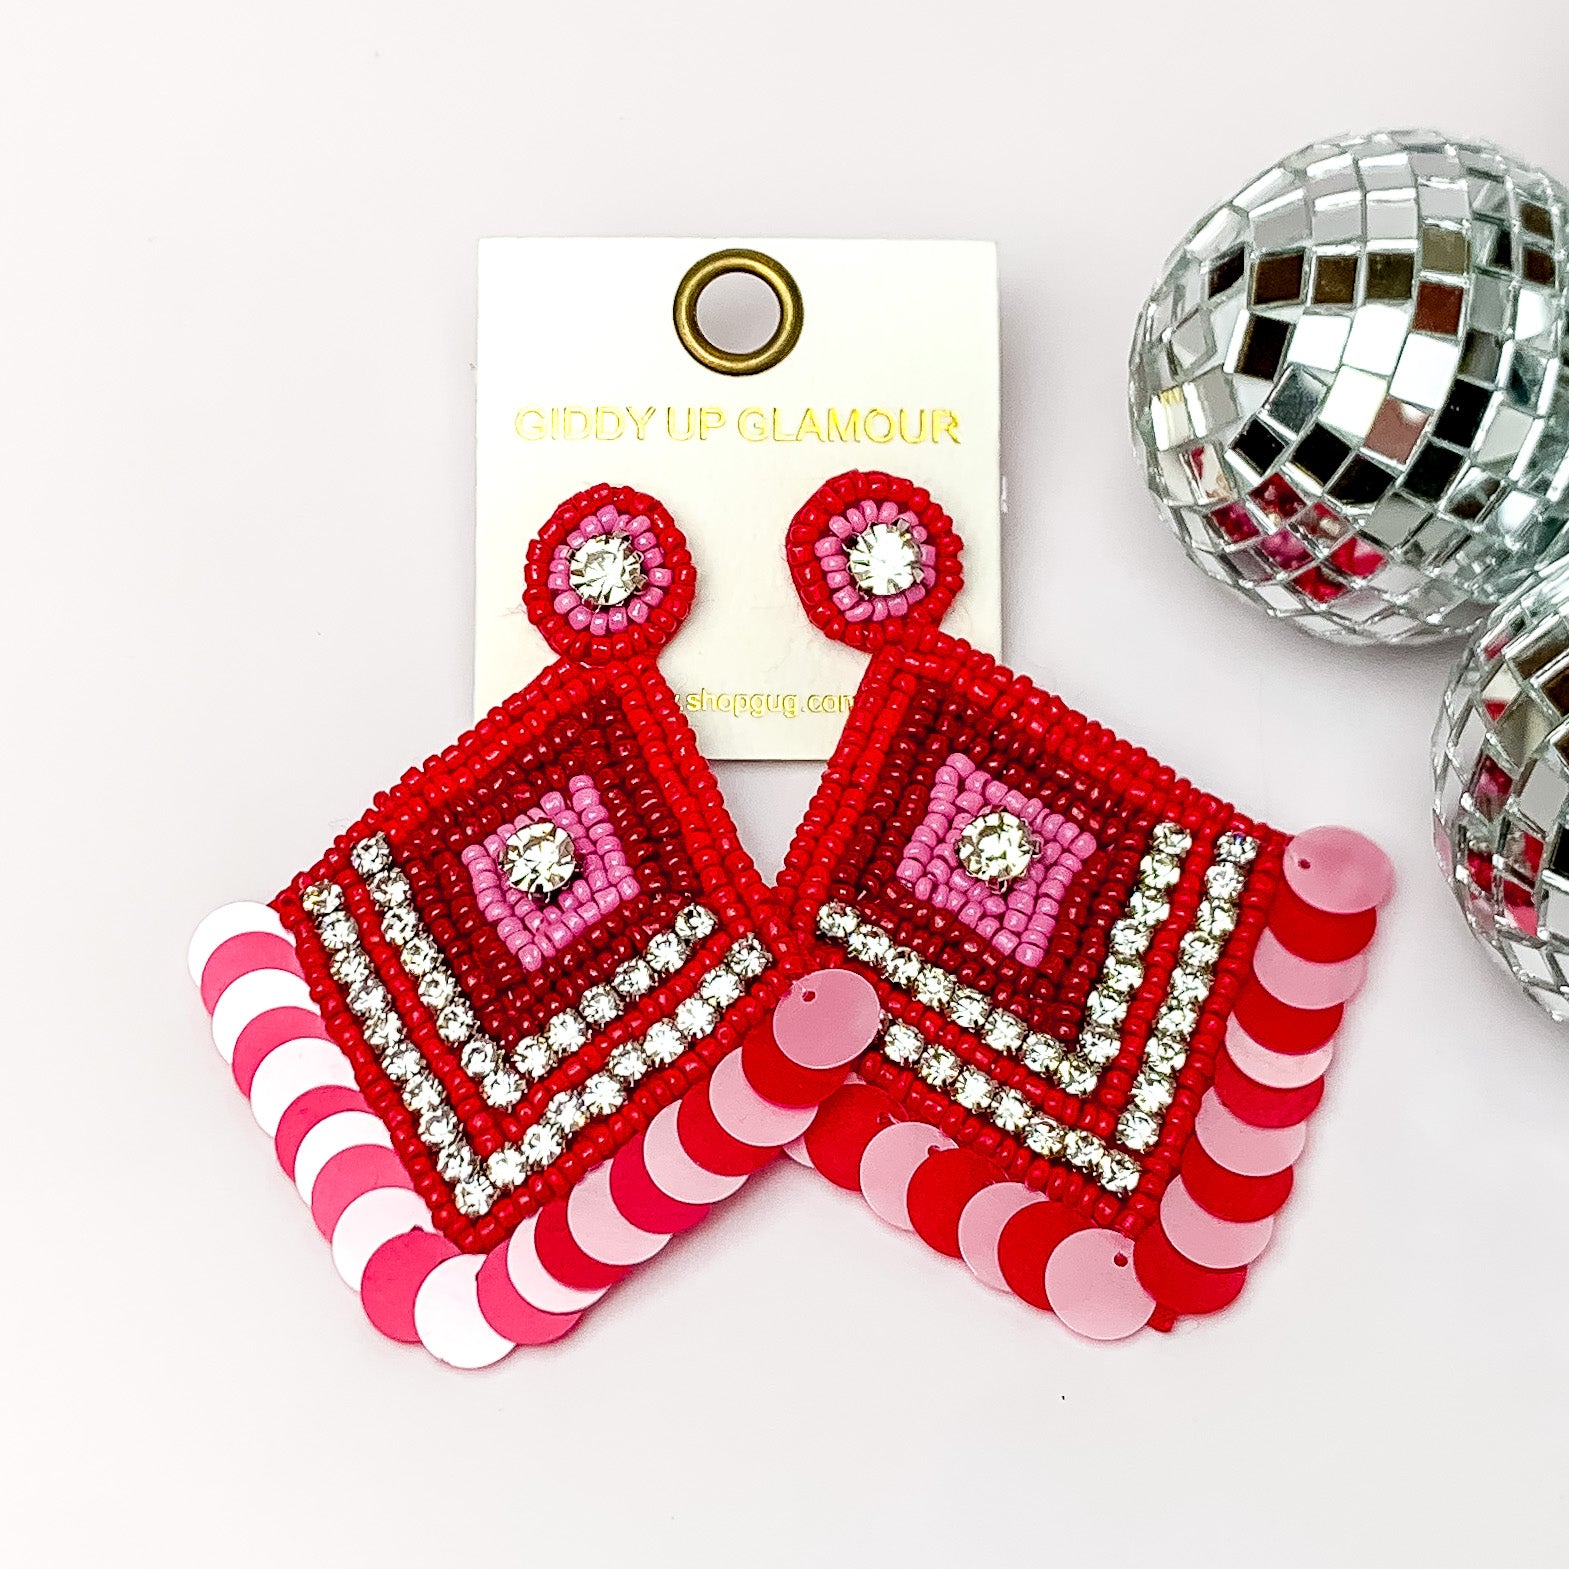 Fashionista Diamond Shaped Beaded Earrings in Red, and Lavender. Pictured on a white background with disco balls on the right side.